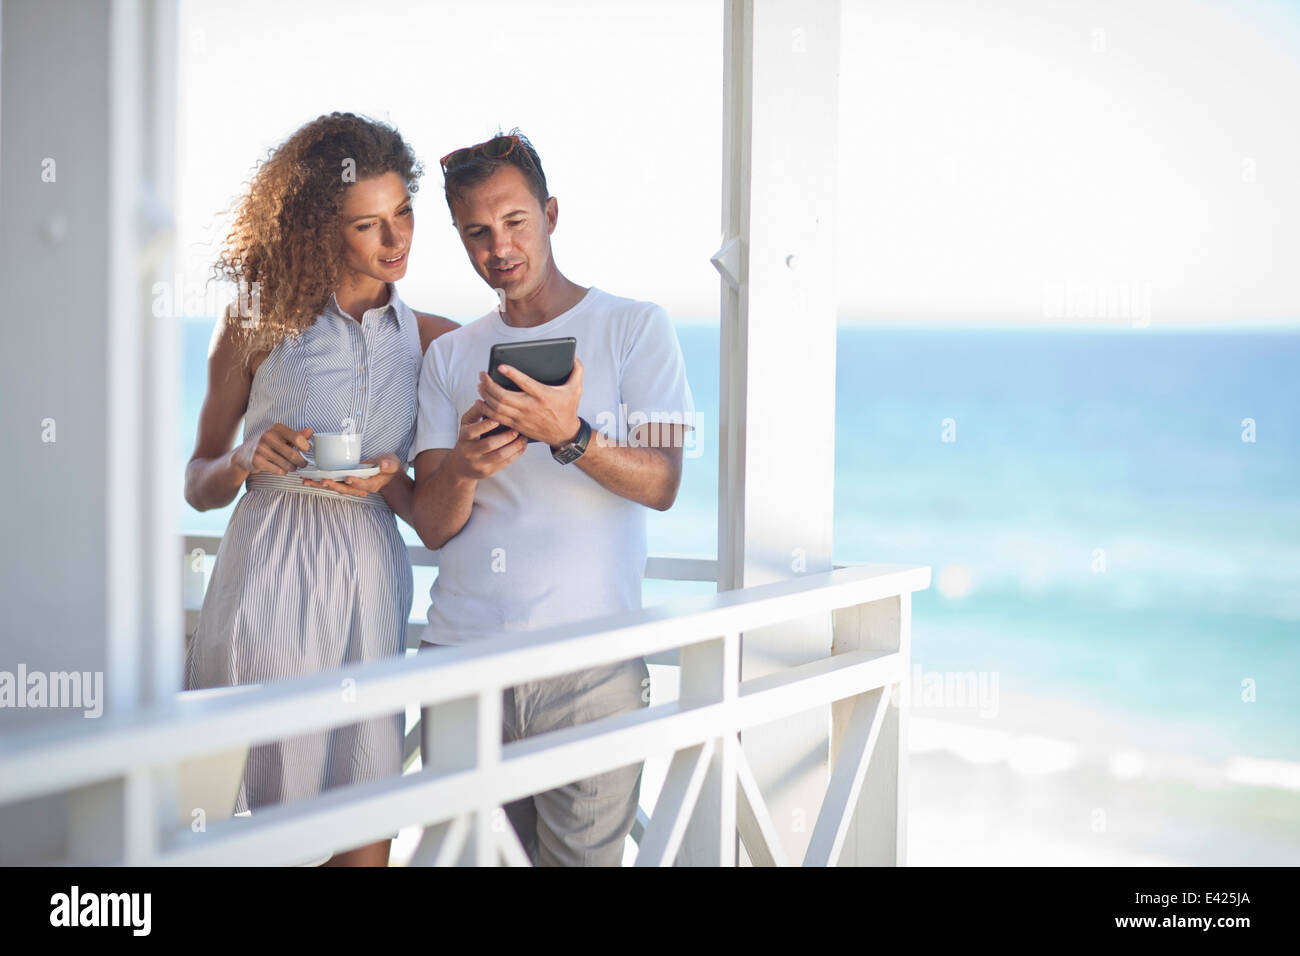 Couple looking at digital tablet on beach chambre balcon Banque D'Images